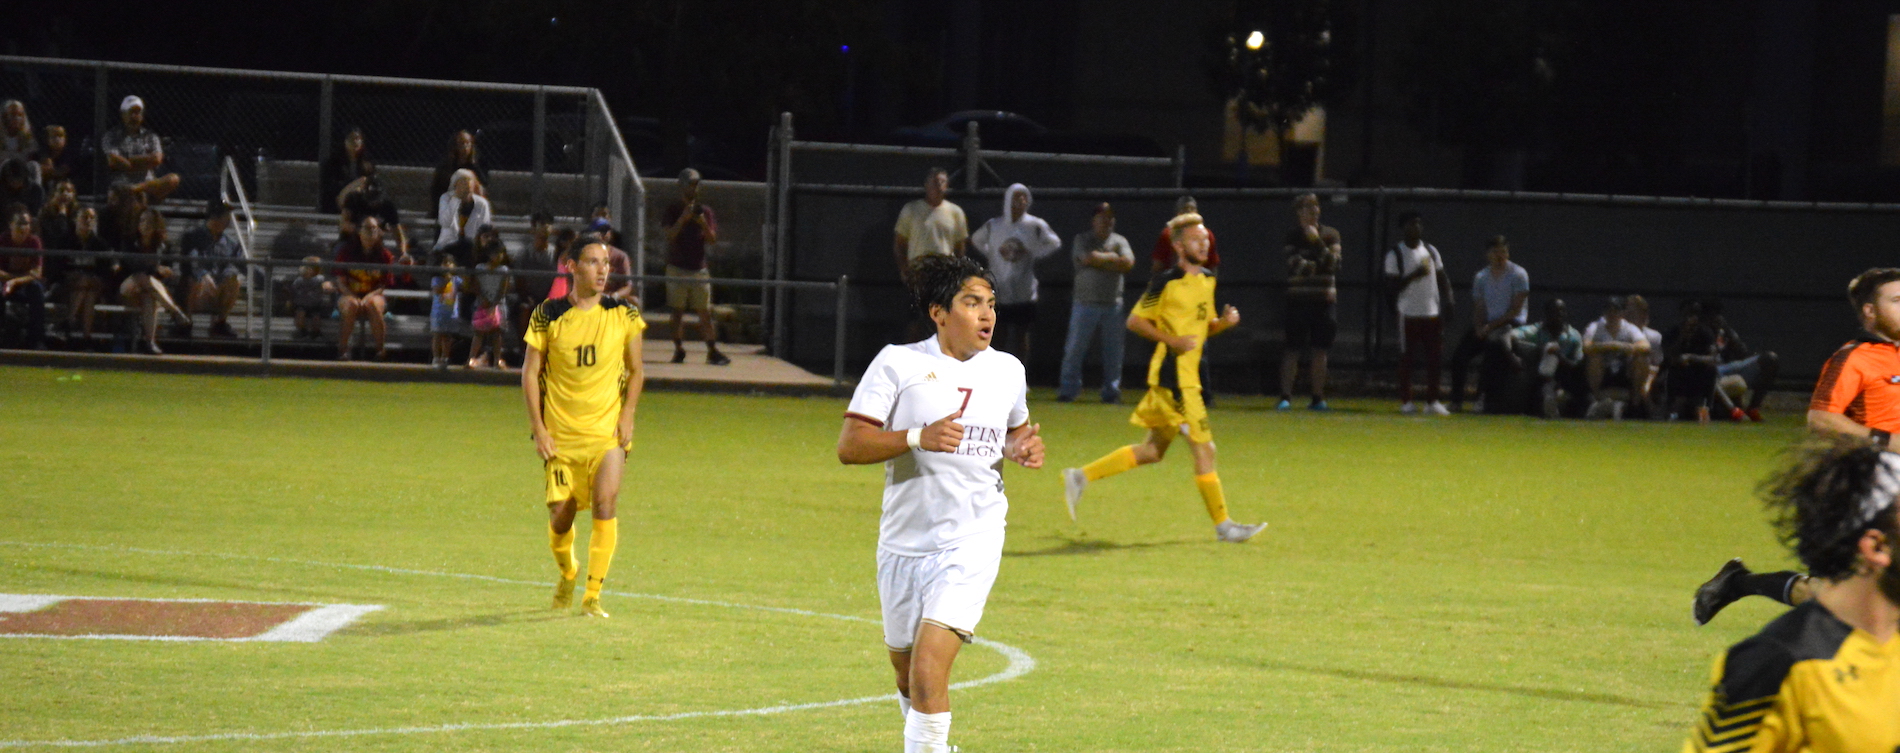 Rodriguez Named SCAC Offensive Player of the Week